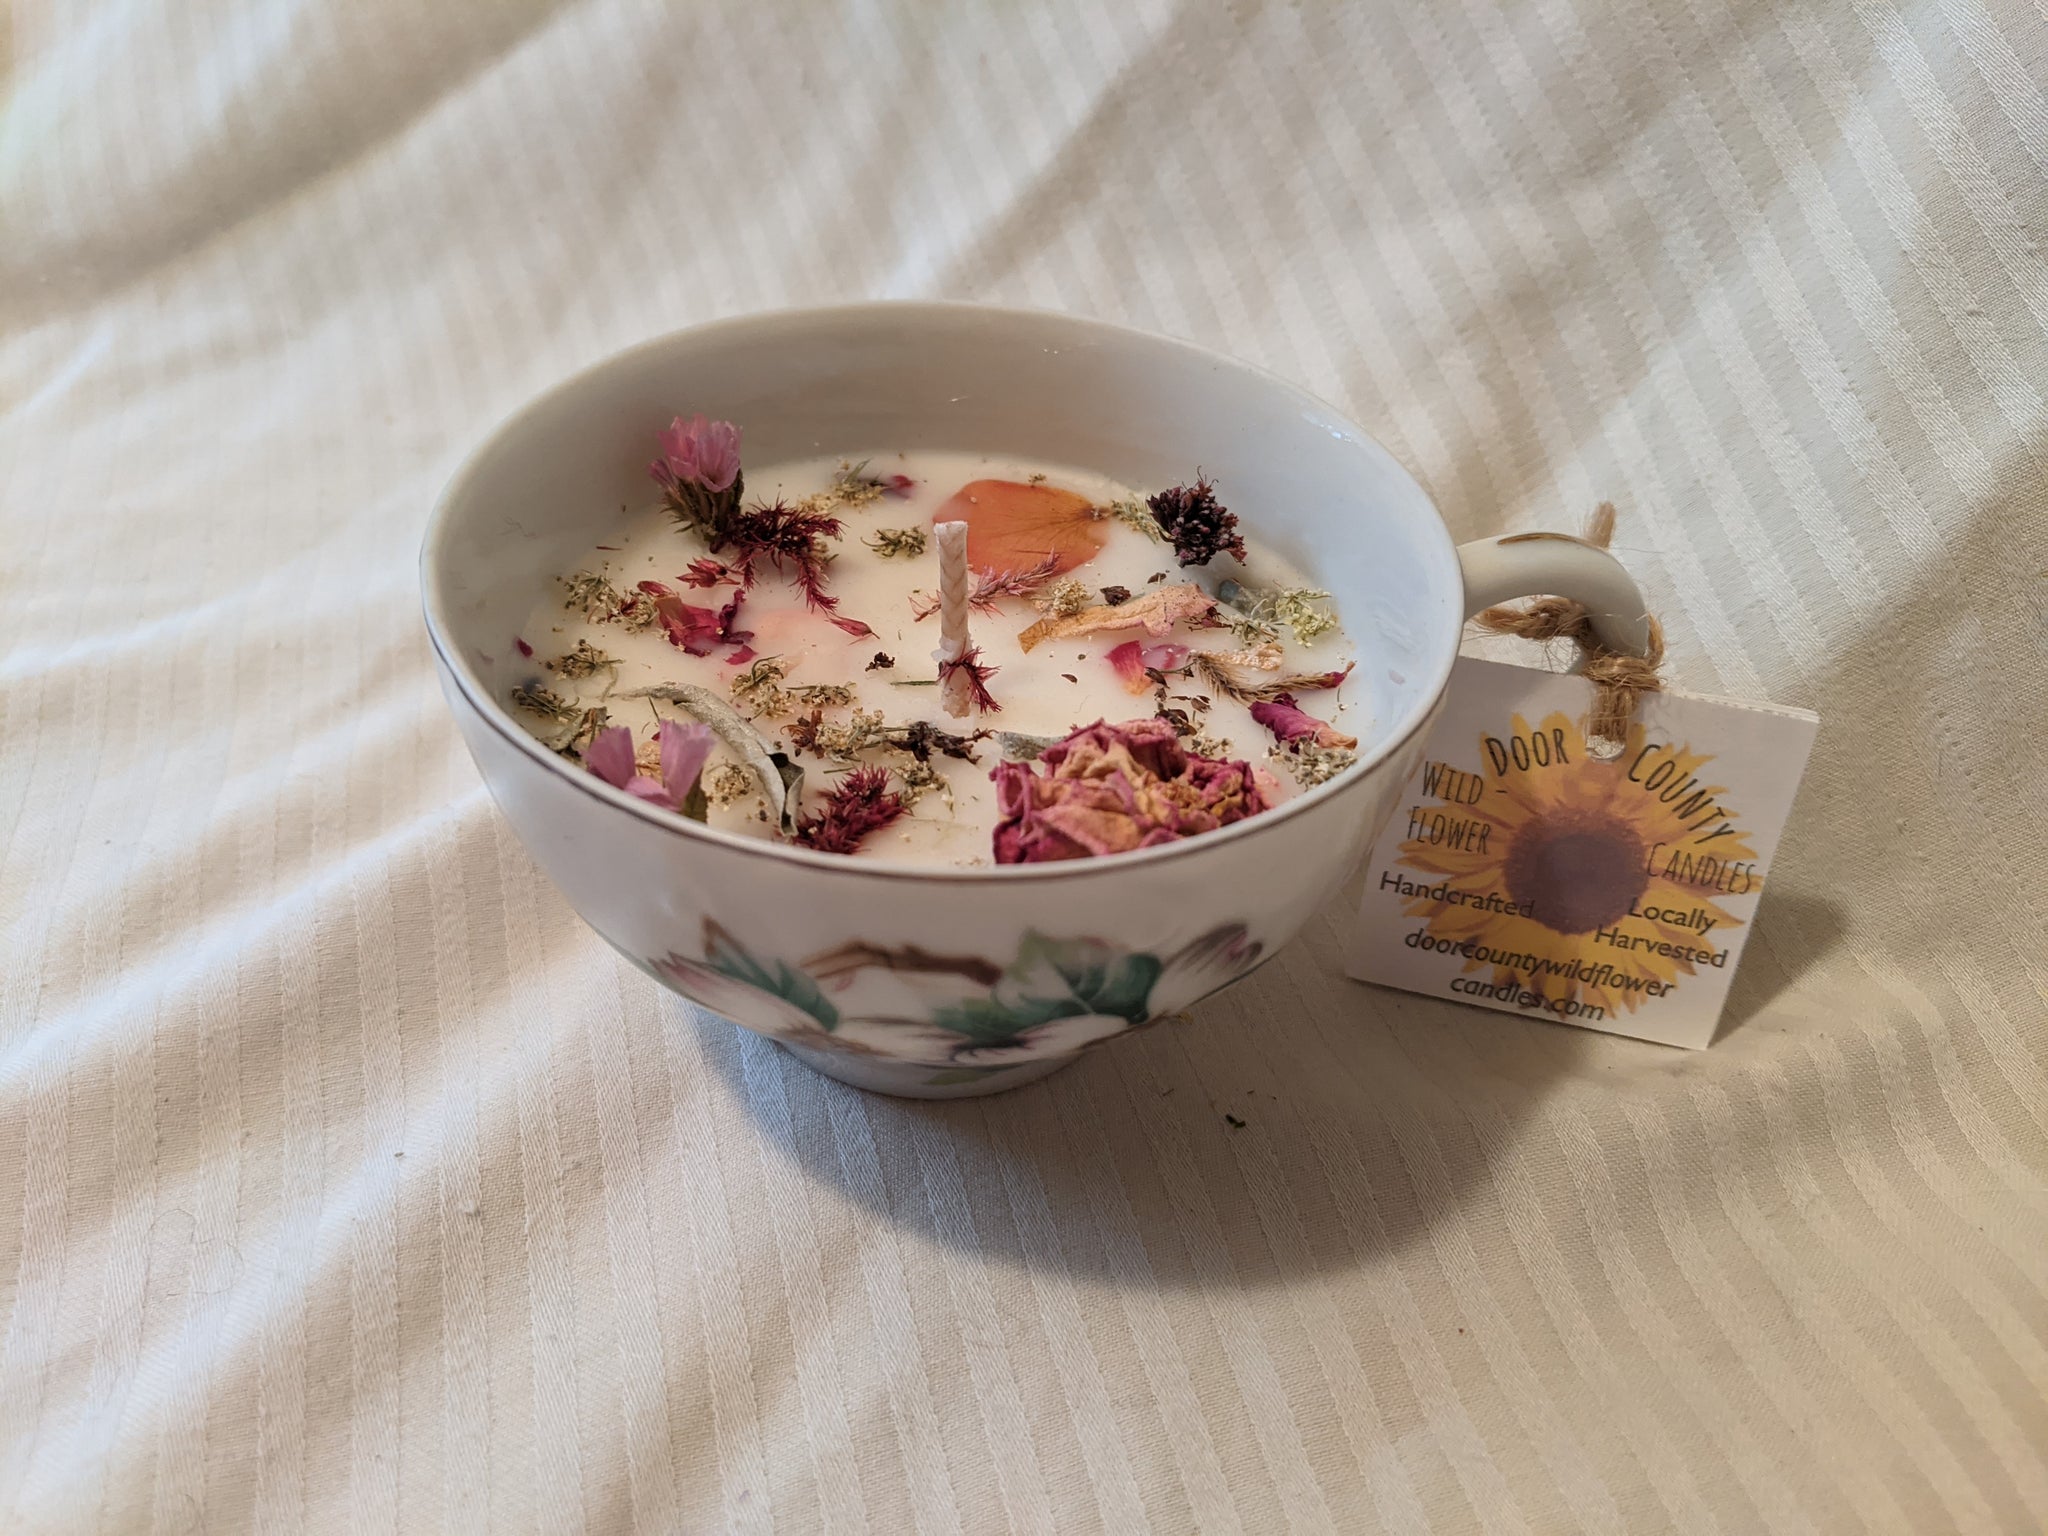 Small - Size "Standard" Teacup Candle (Example Only)